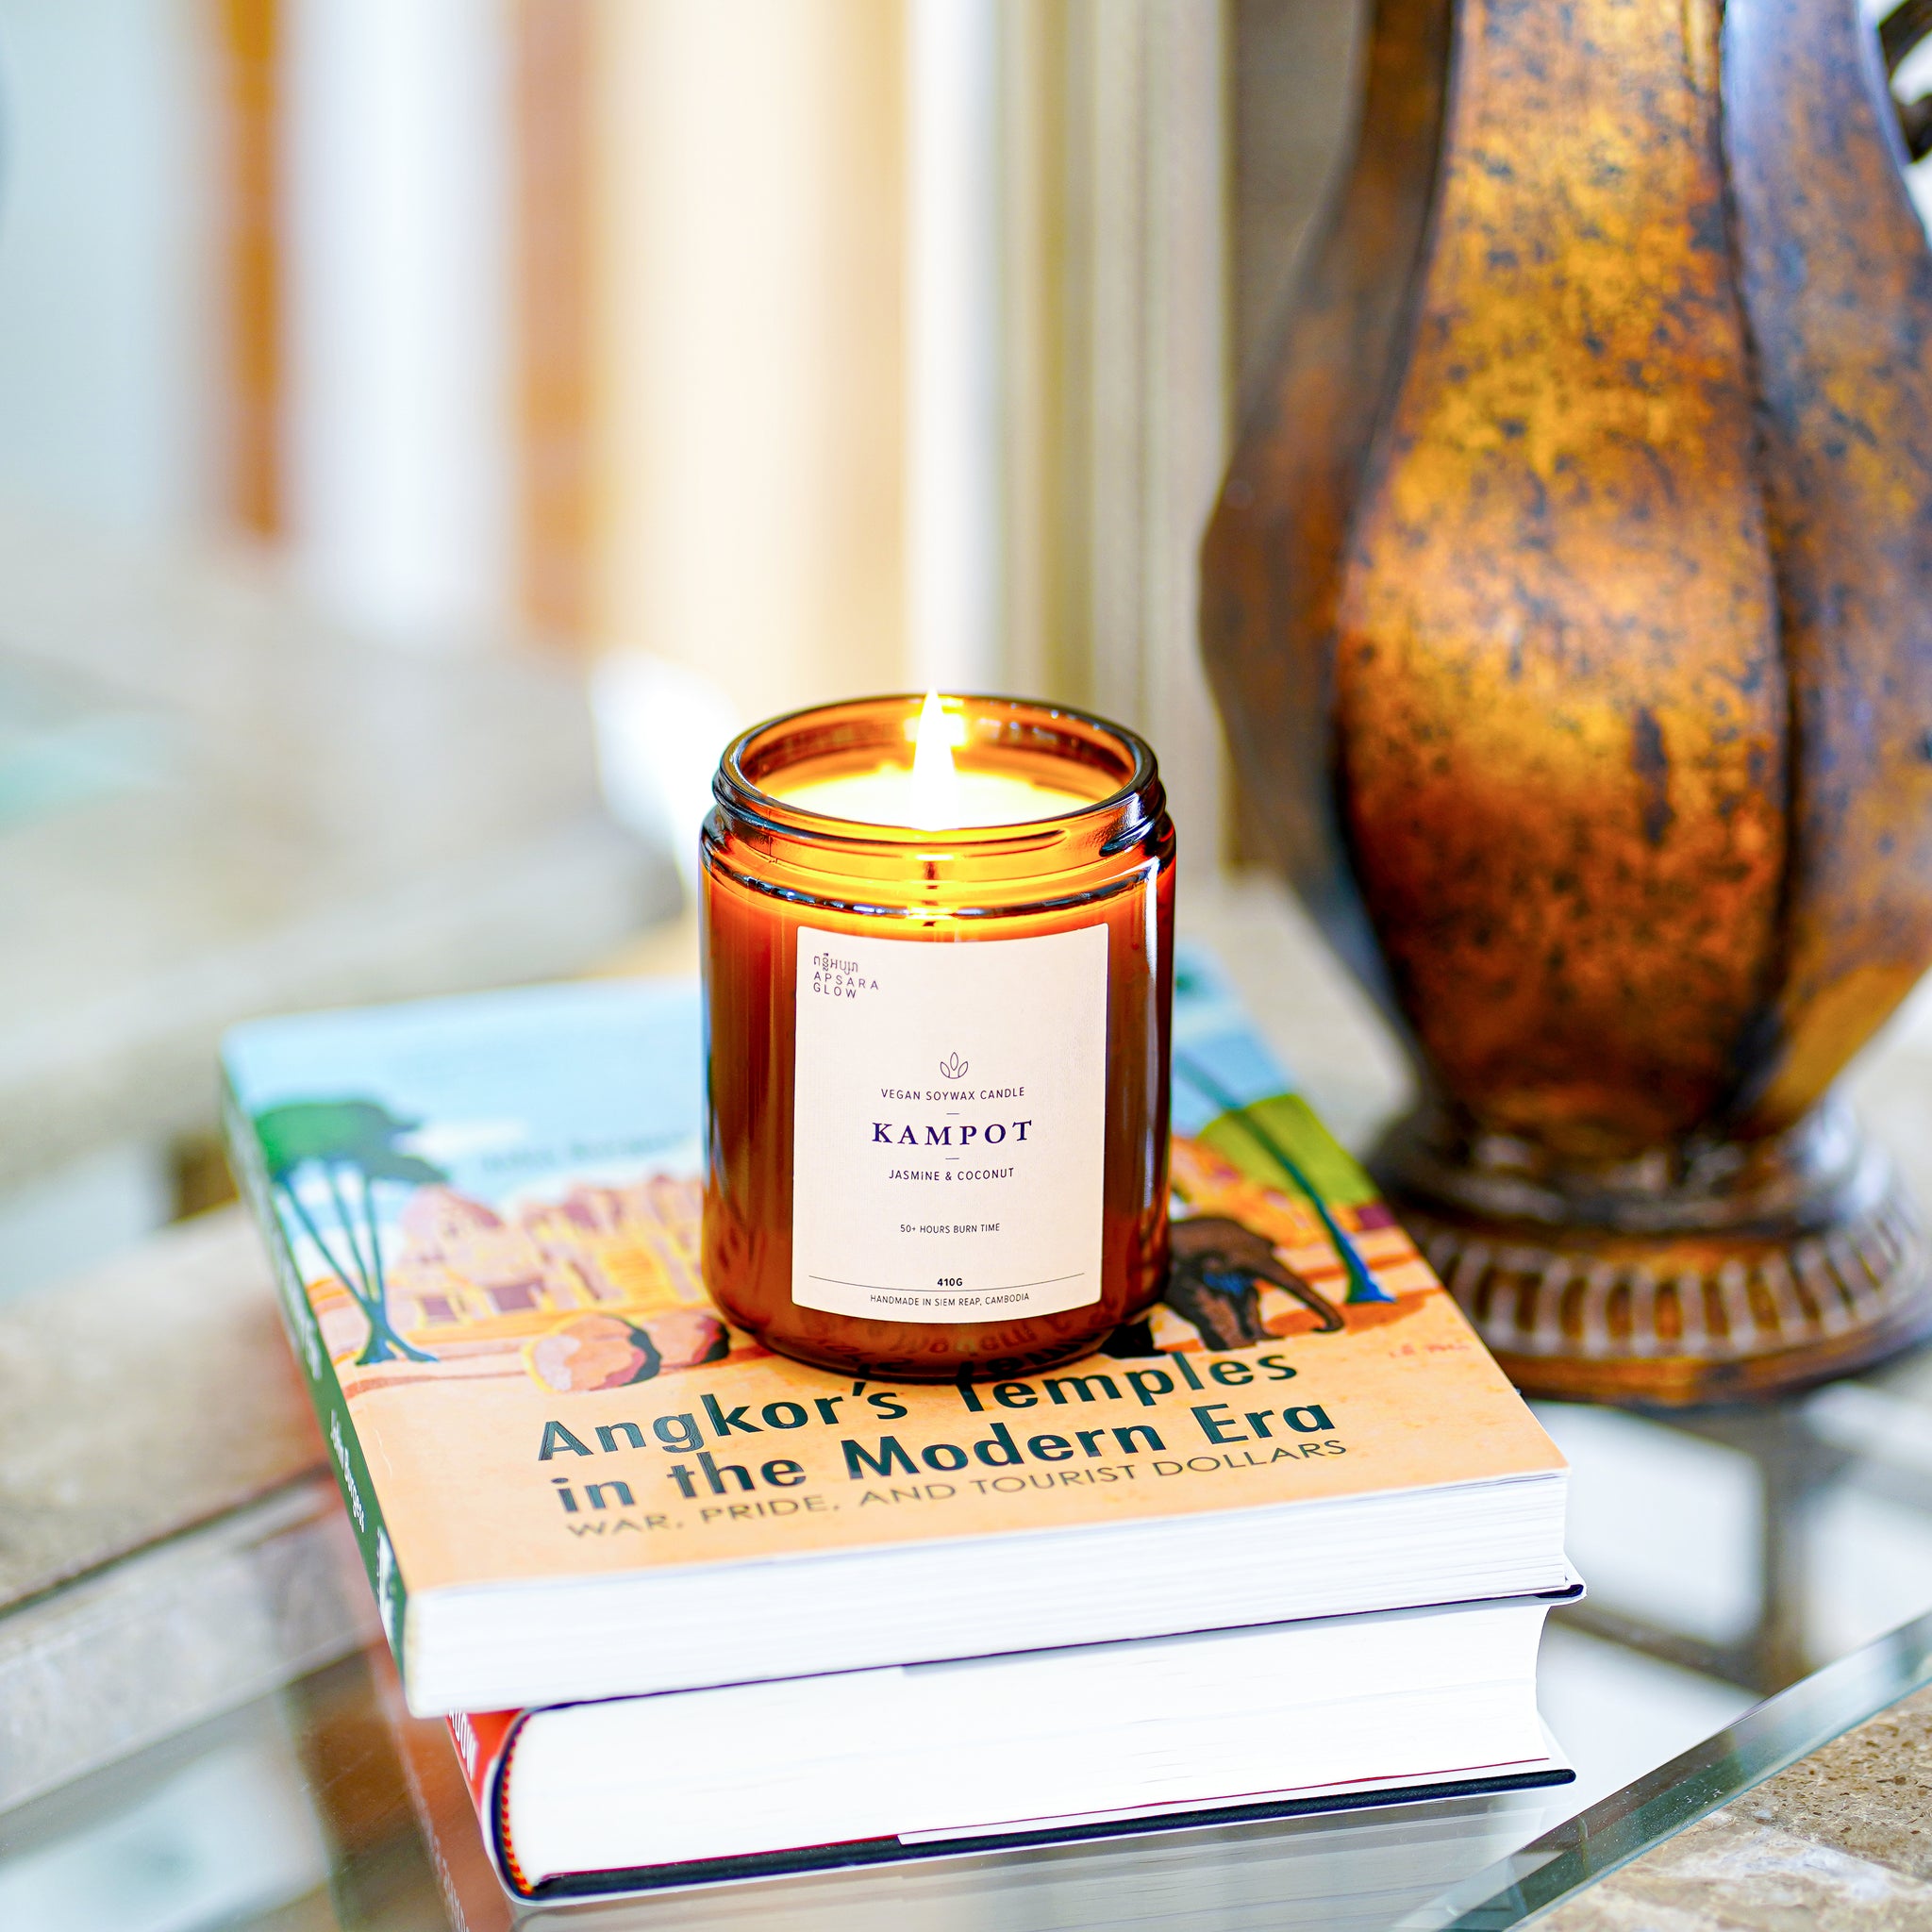 Bring charm and laid back vibe of Kampot into your space. This natural, vegan soy wax candle features floral and citrus scents of sweet jasmine blooms, nutty coconut with a hint of fresh lime. 